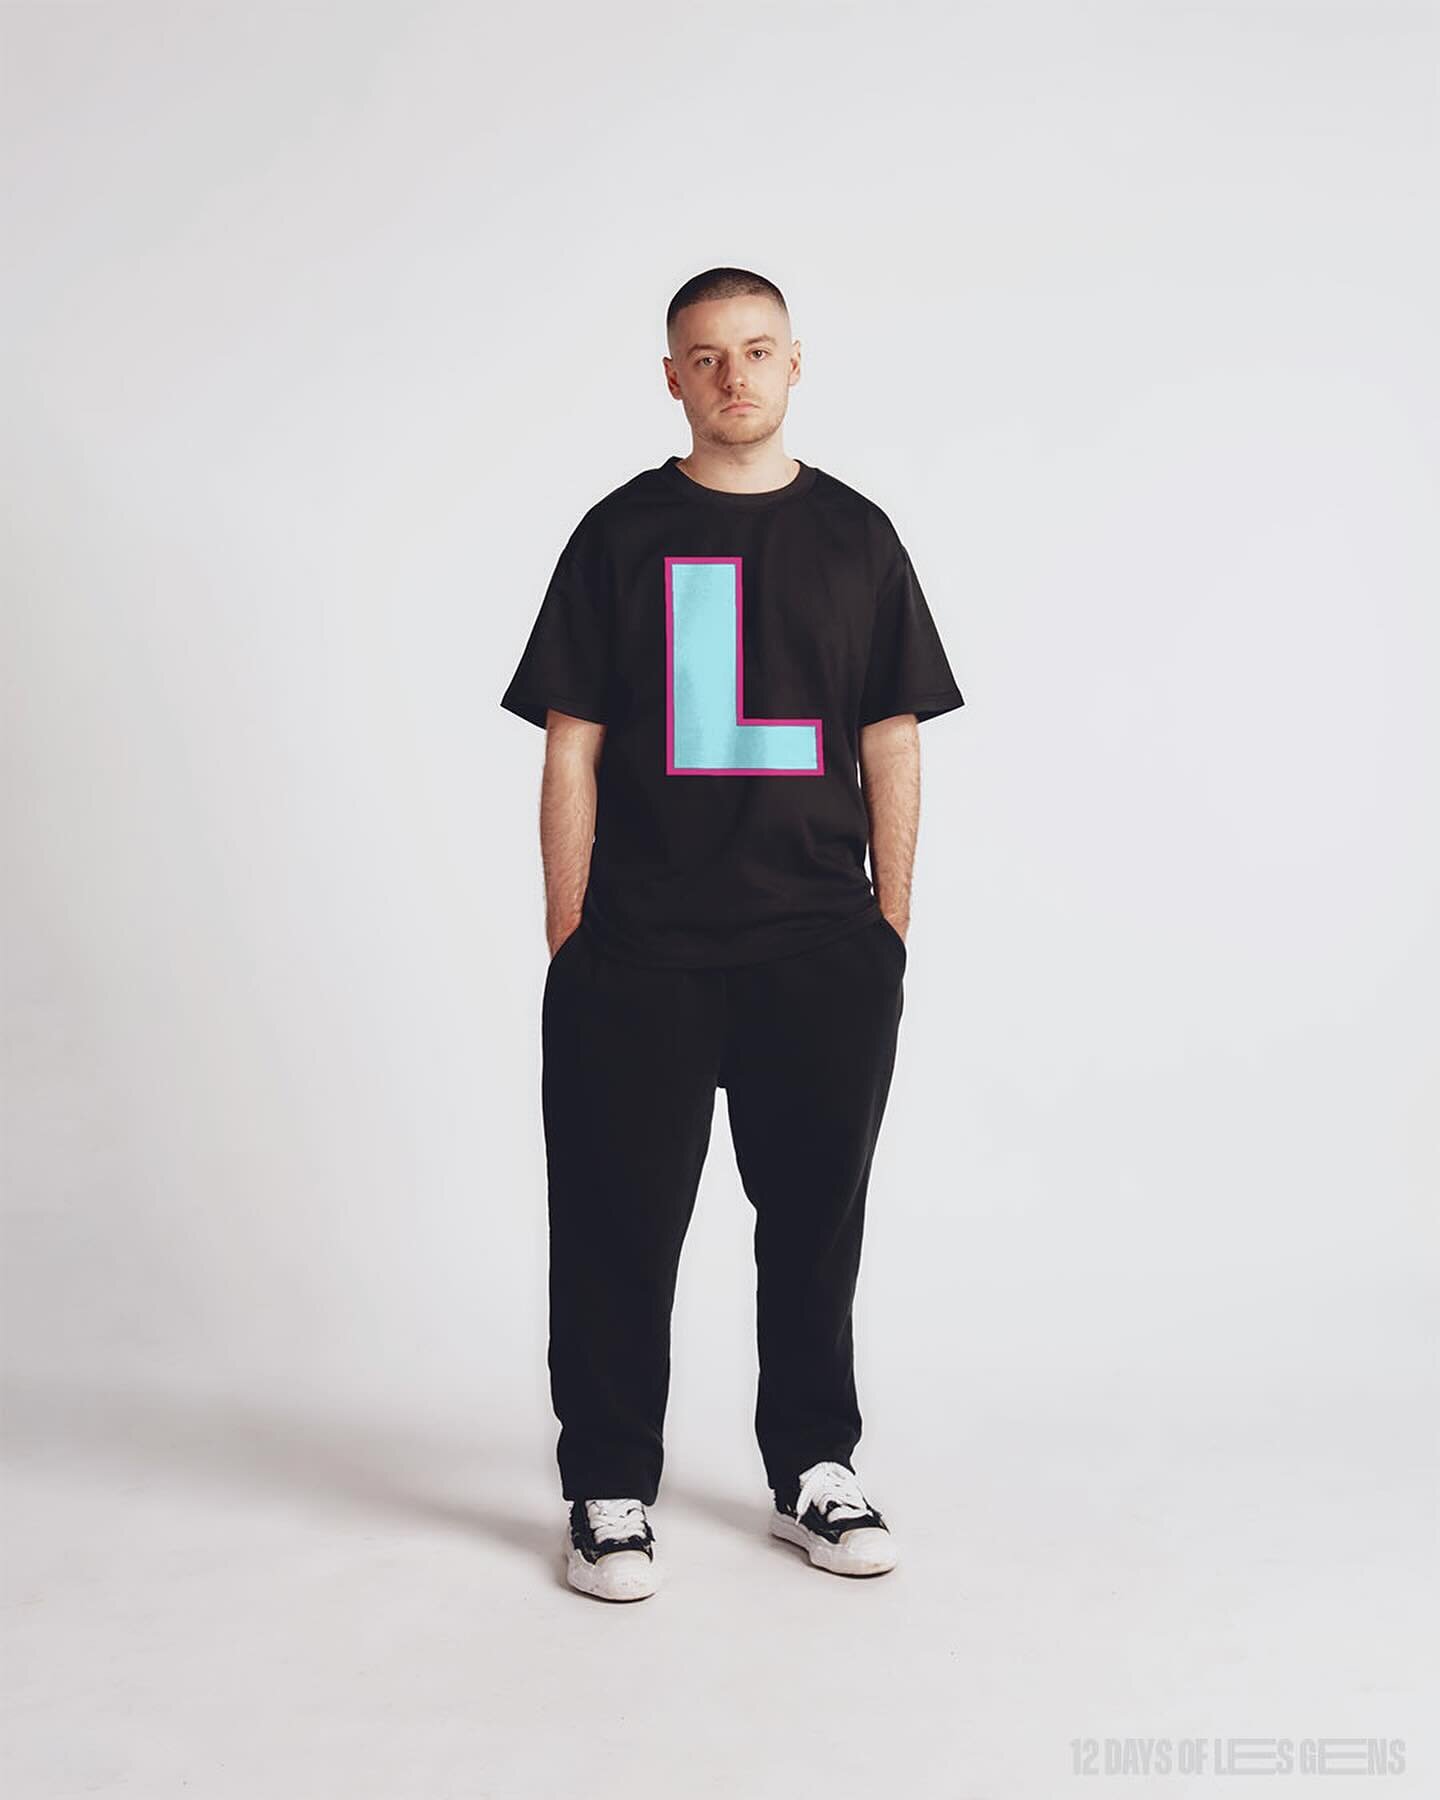 Day 10 - &lsquo;Letters&rsquo; T-Shirt.

Available for 24 hours. lesgensclothing.com